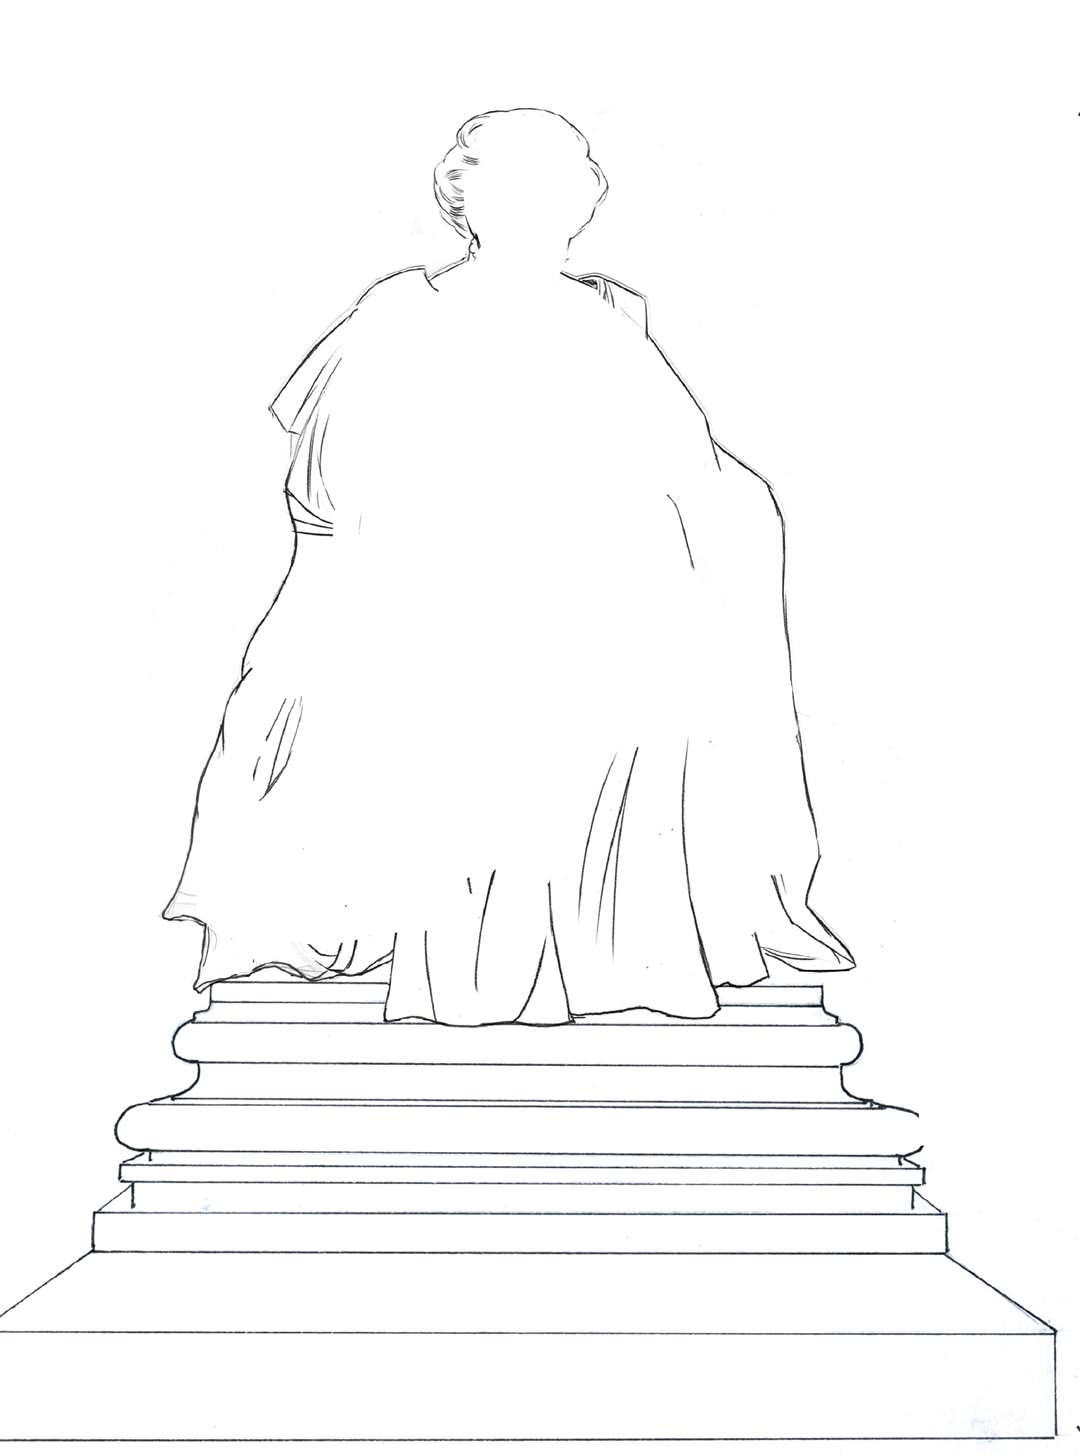 An outline of how the statue of the Queen in Gravesend will look